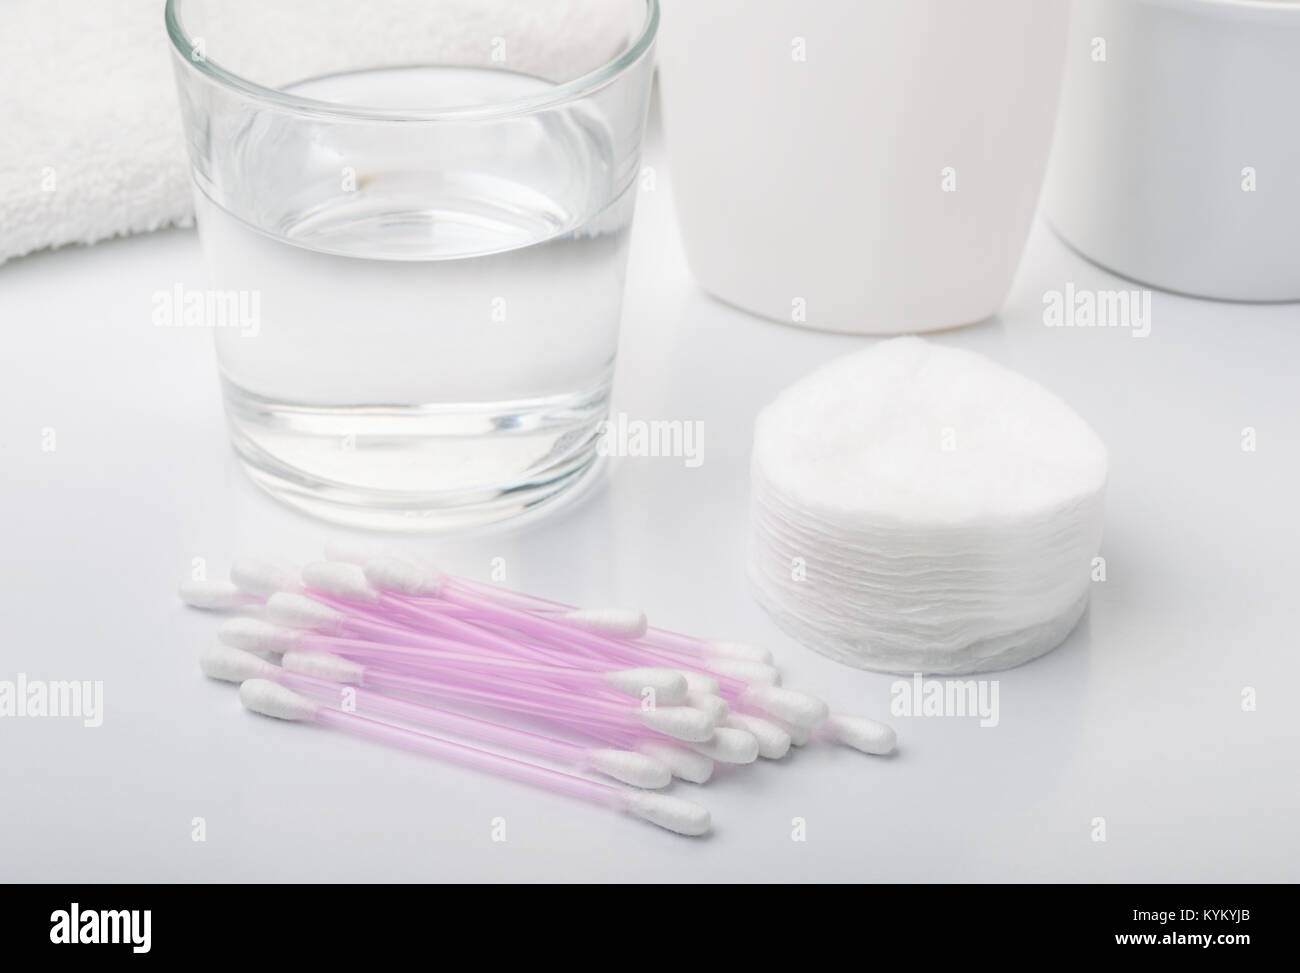 Hygiene  products - cotton pads and sticks, water, towel,  lotions on white background Stock Photo